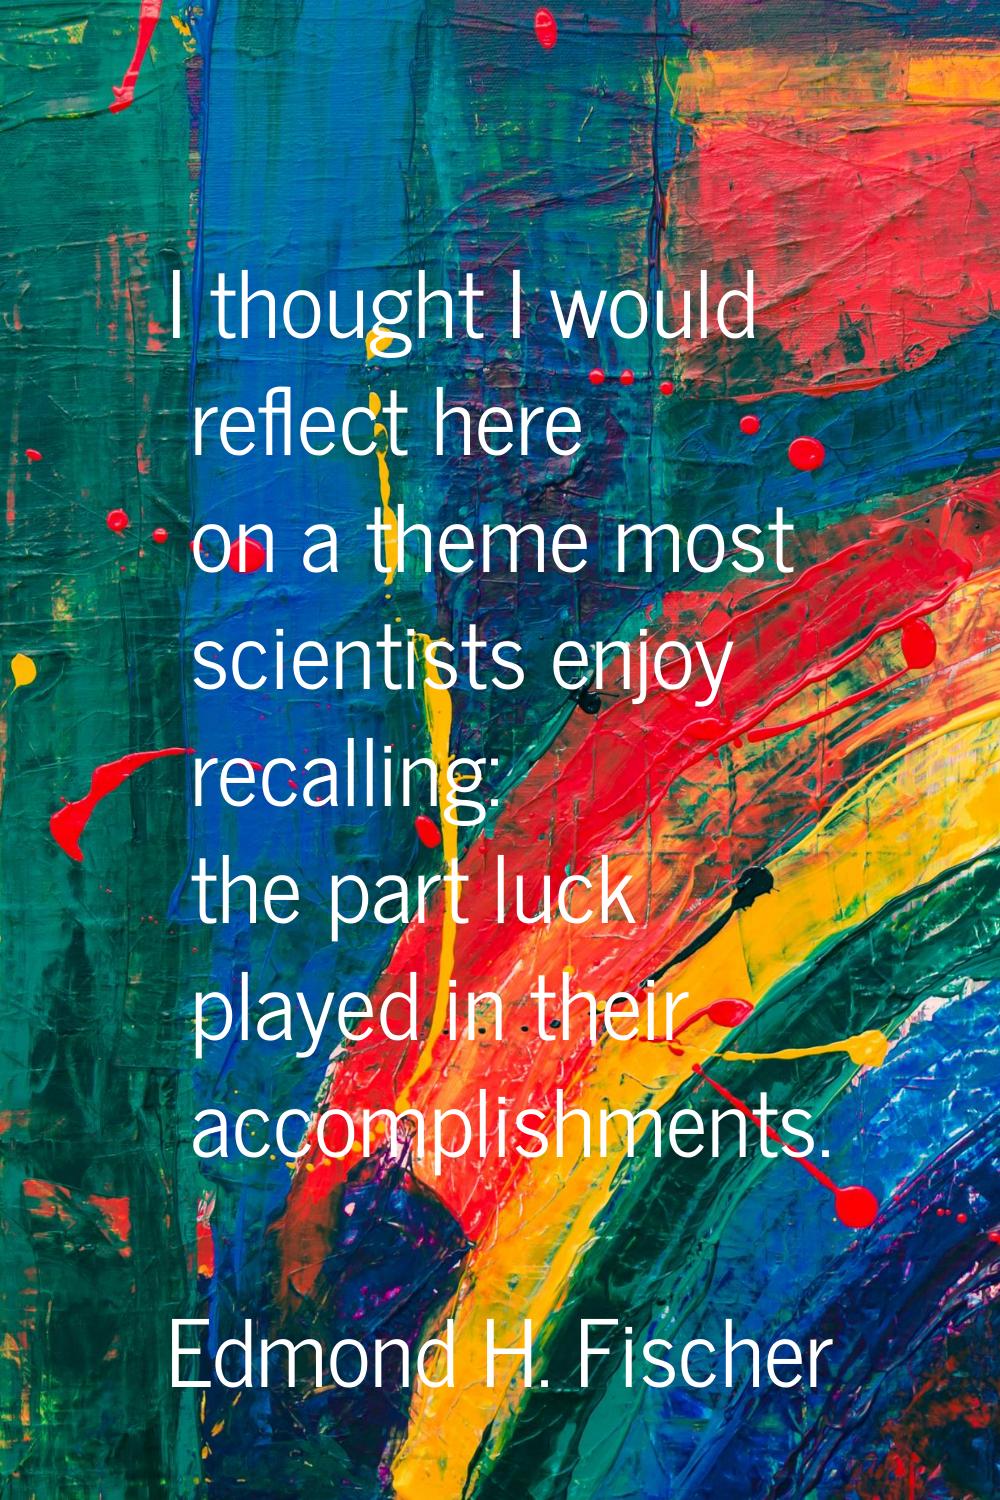 I thought I would reflect here on a theme most scientists enjoy recalling: the part luck played in 